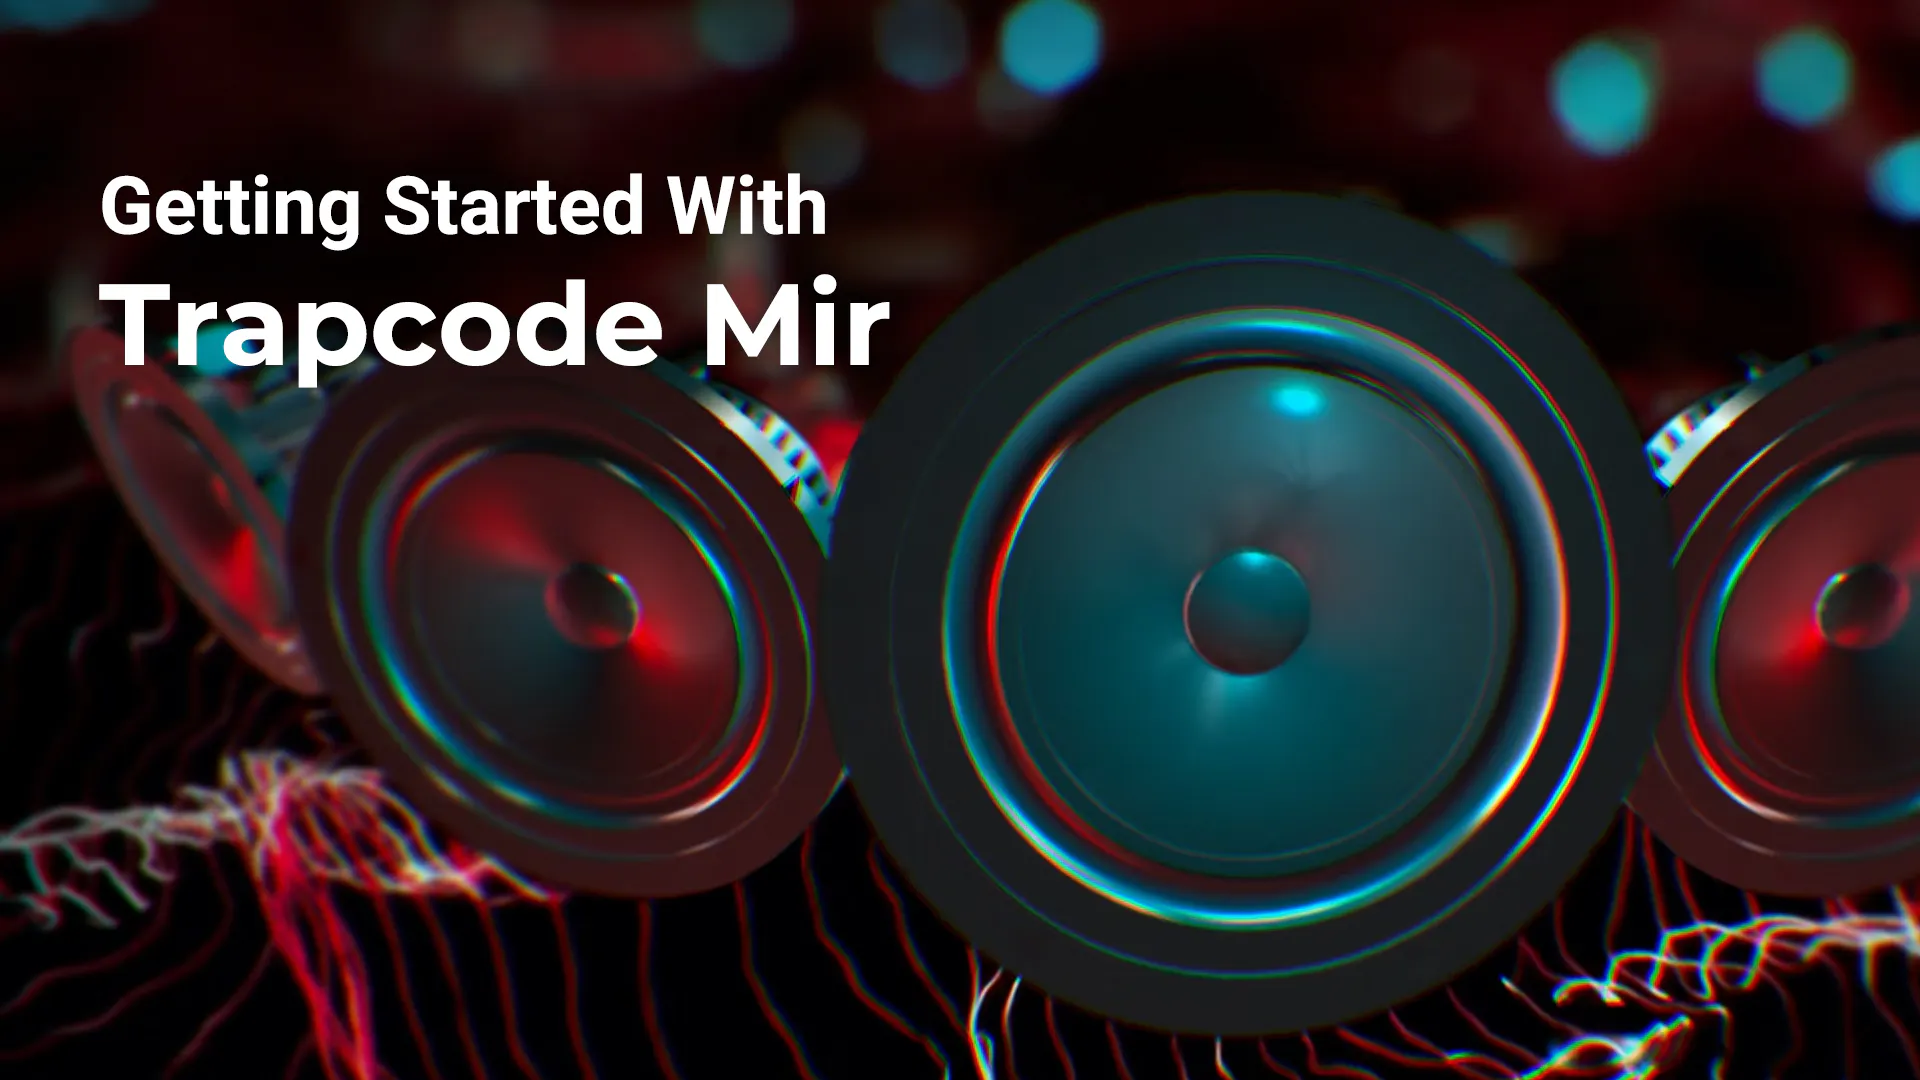 Getting Started with Trapcode Mir